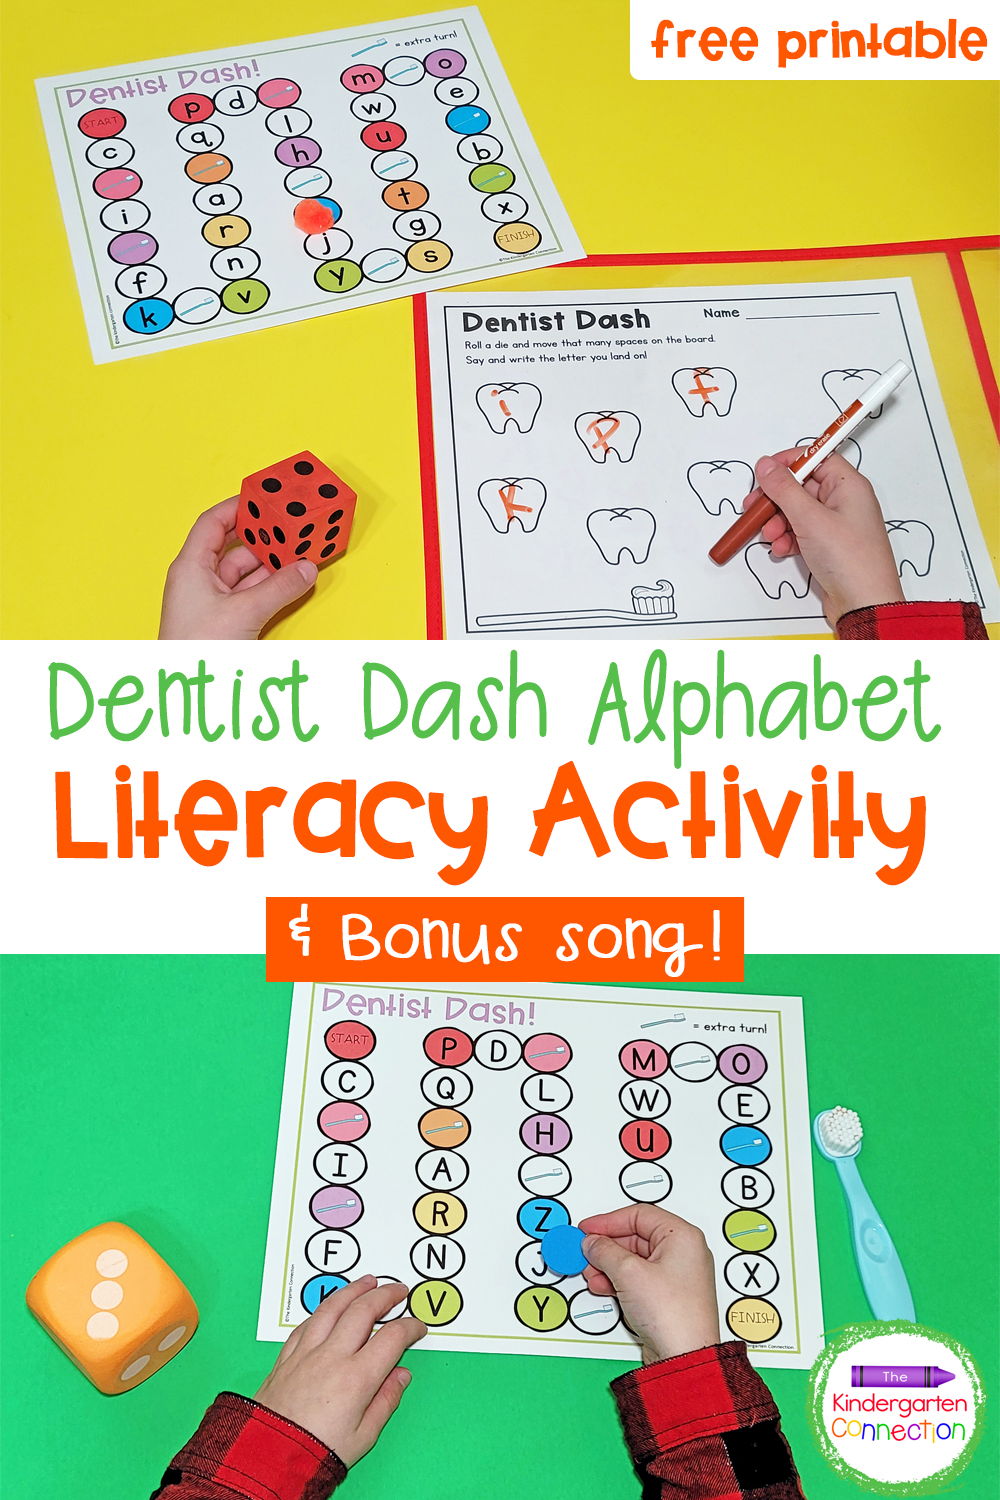 This free Dentist Dash Alphabet Activity will help your students build letter recognition skills and writing skills in February or anytime!